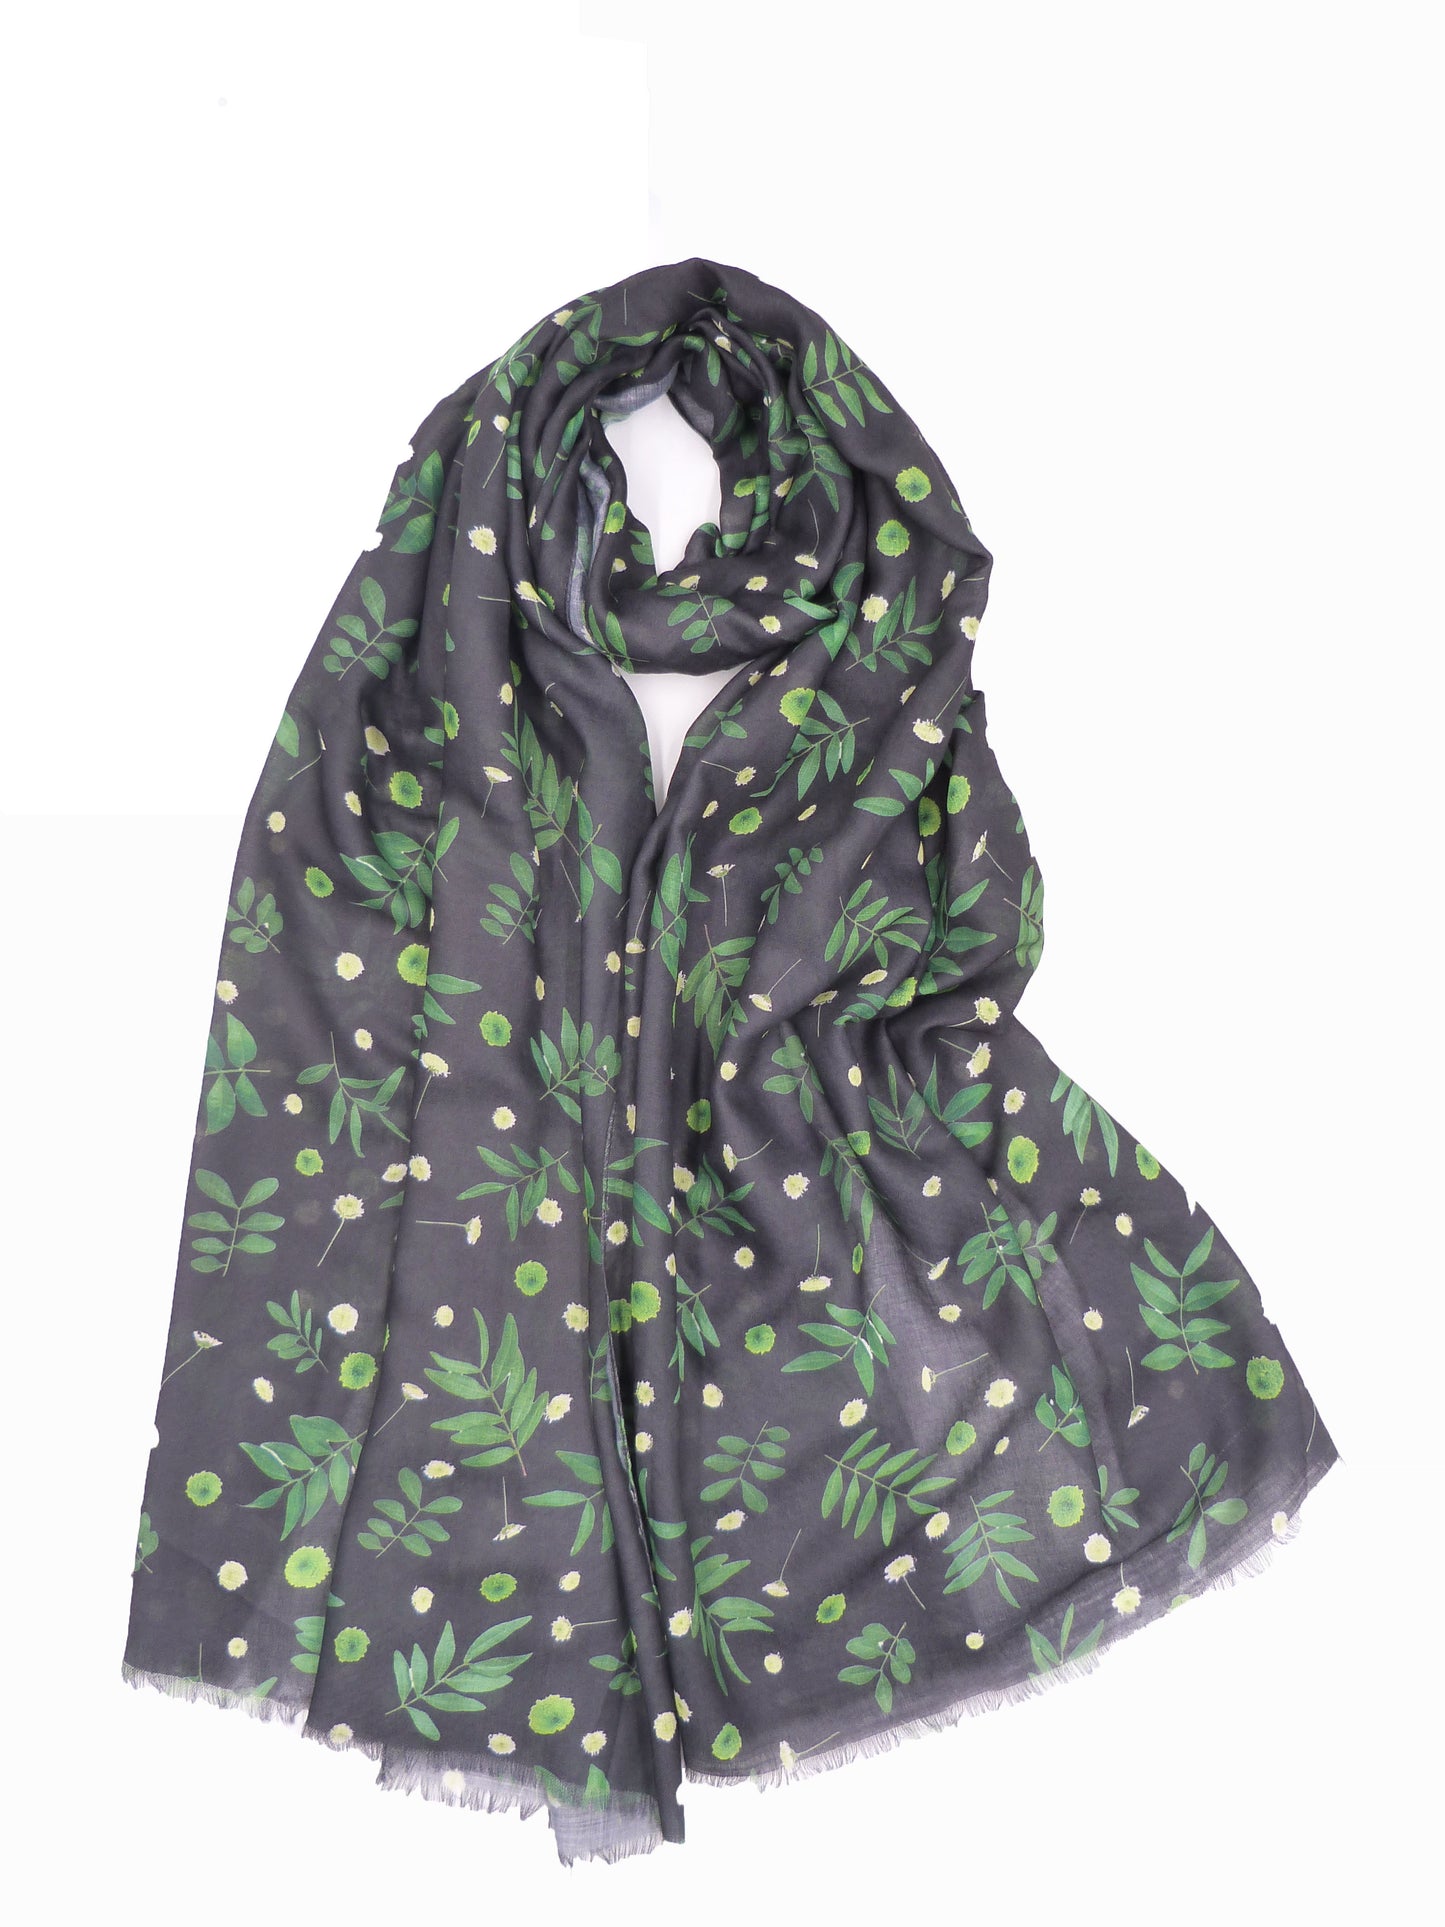 Mountain Ash Print Scarf Come With Gift Box